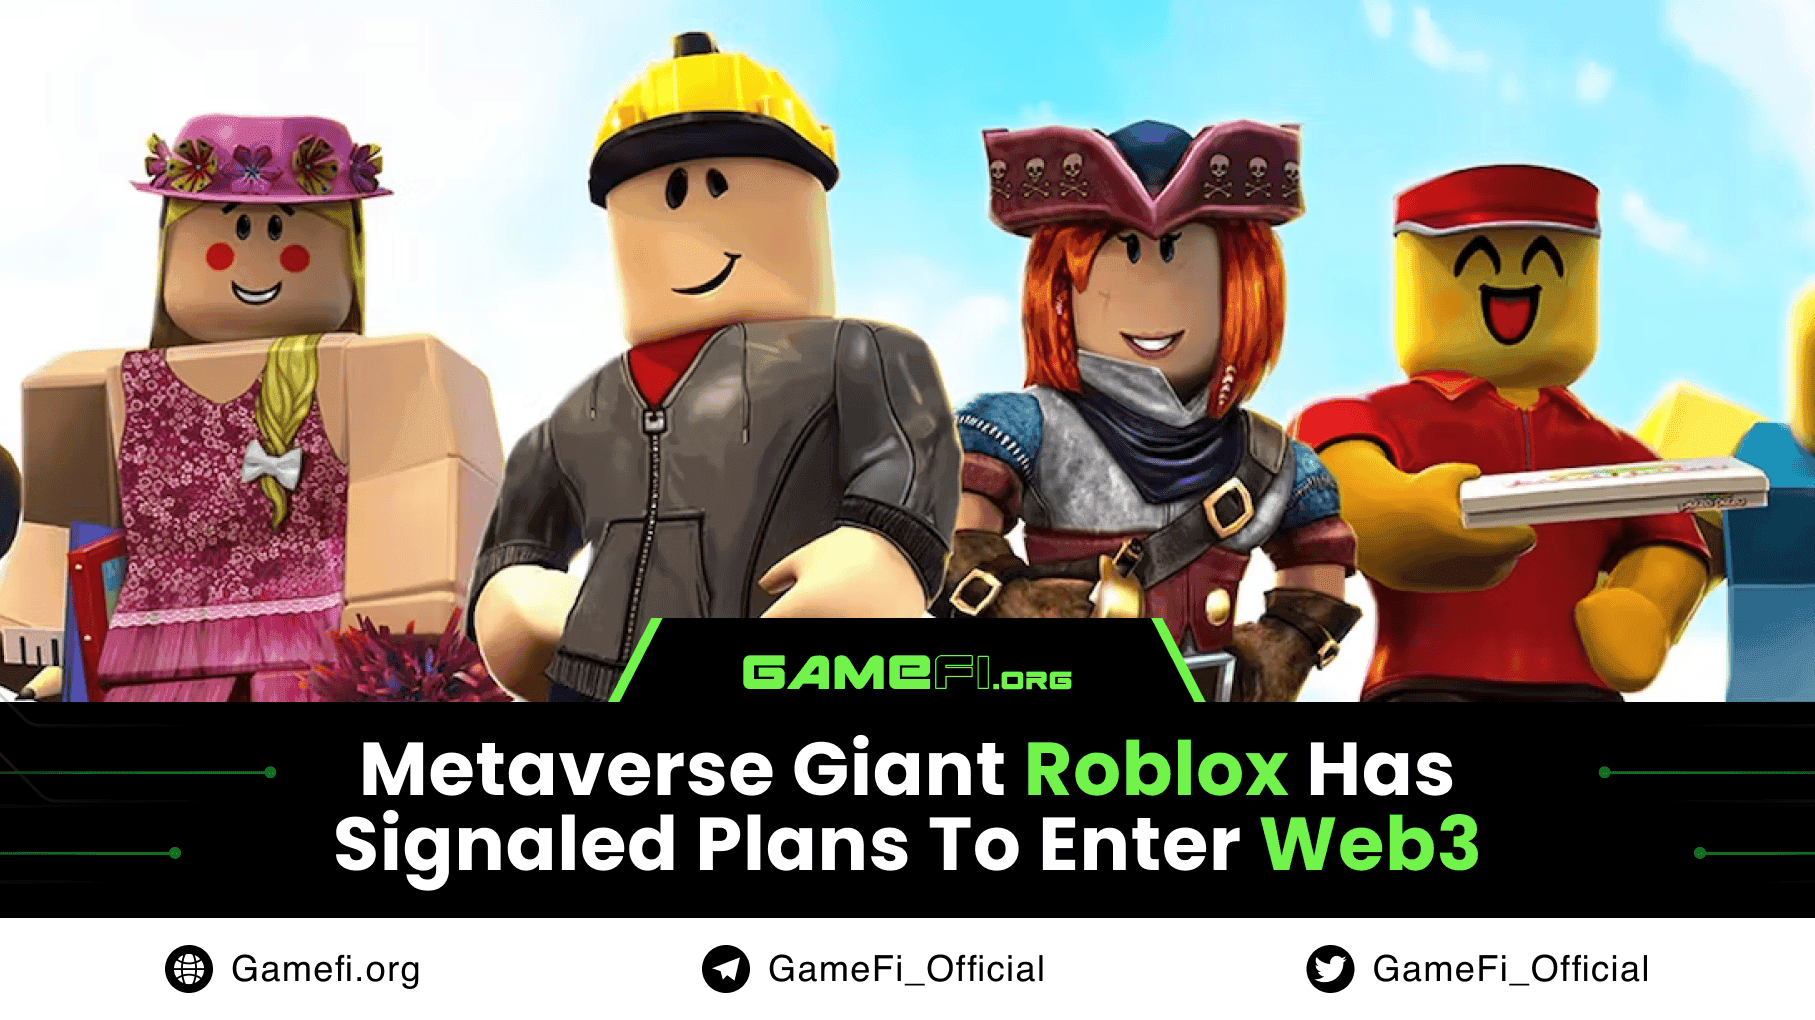 Metaverse Giant Roblox Has Signaled Plans To Enter Web3